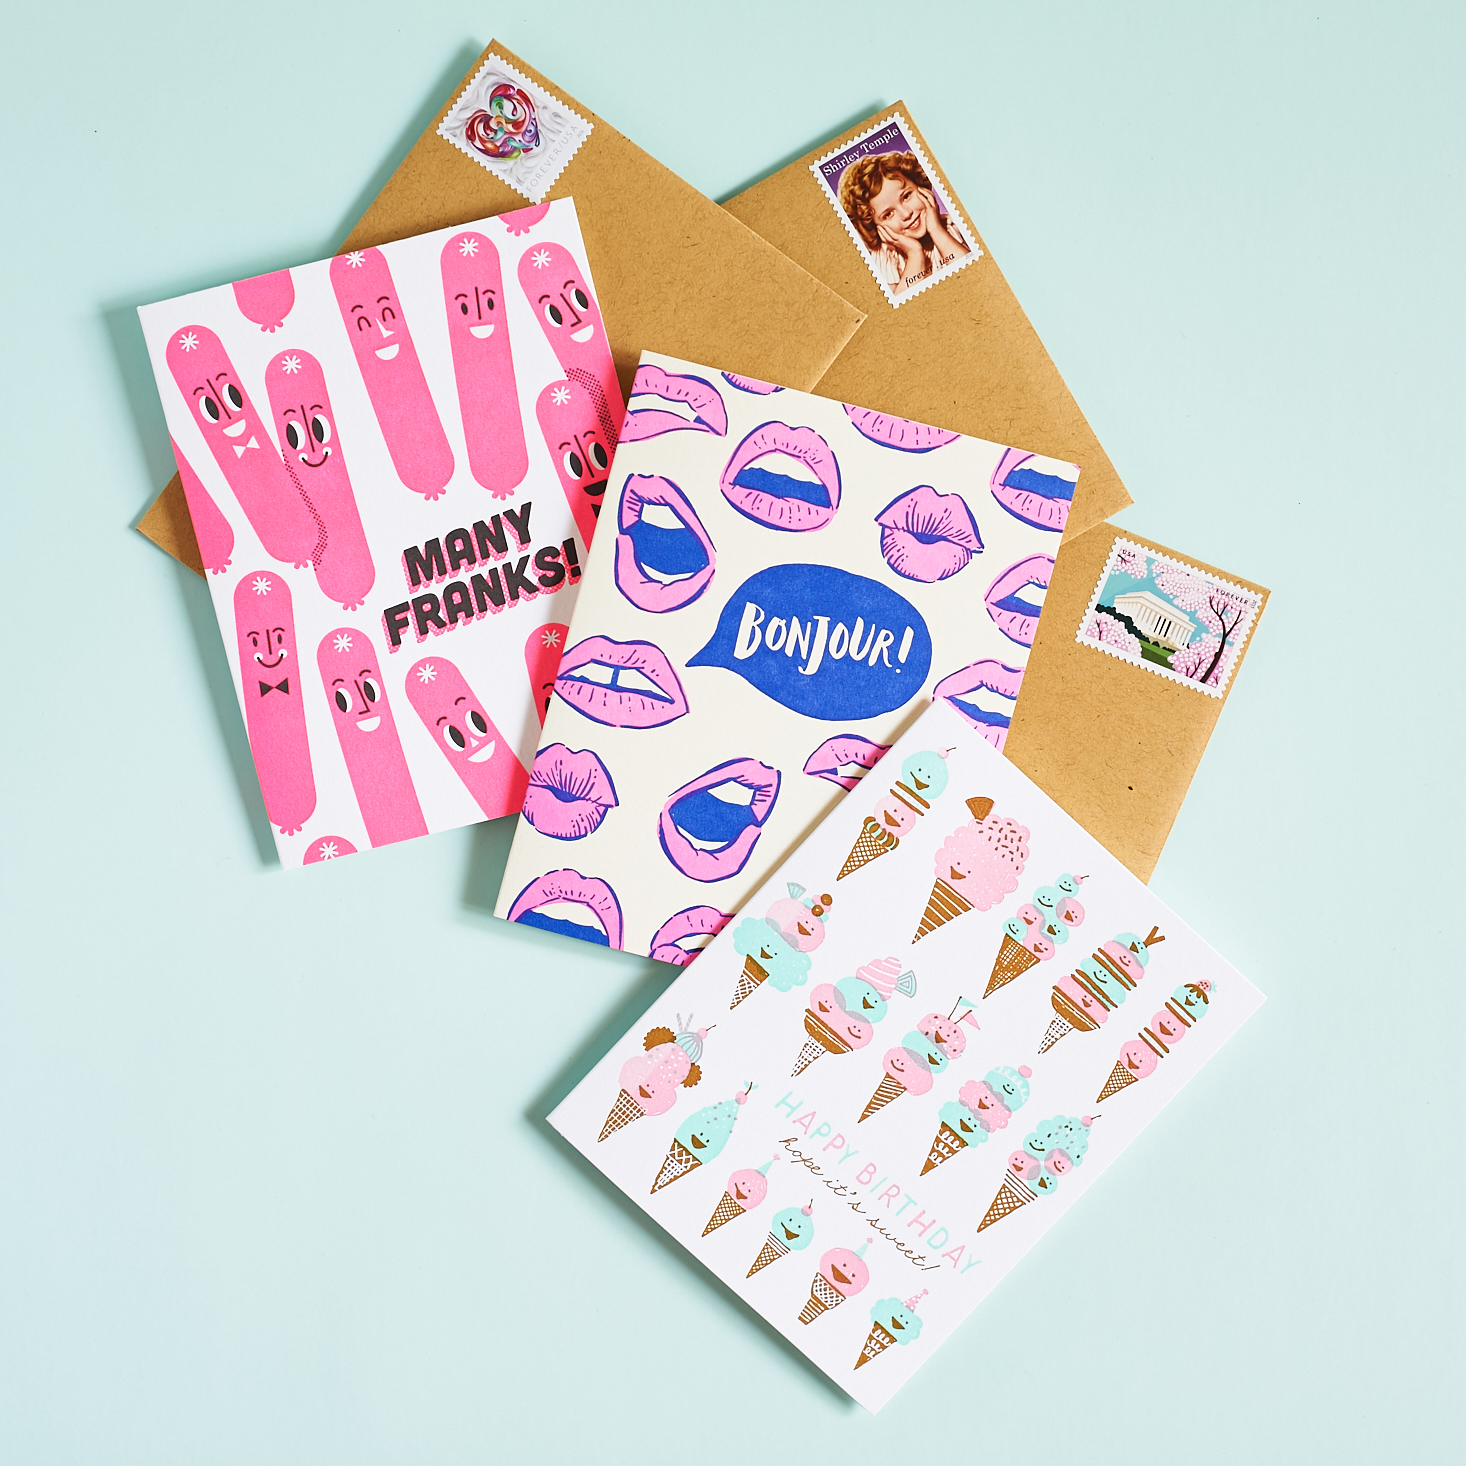 Meet Hello!Lucky, a cute, indie greeting card company with a 3-month subscription box!